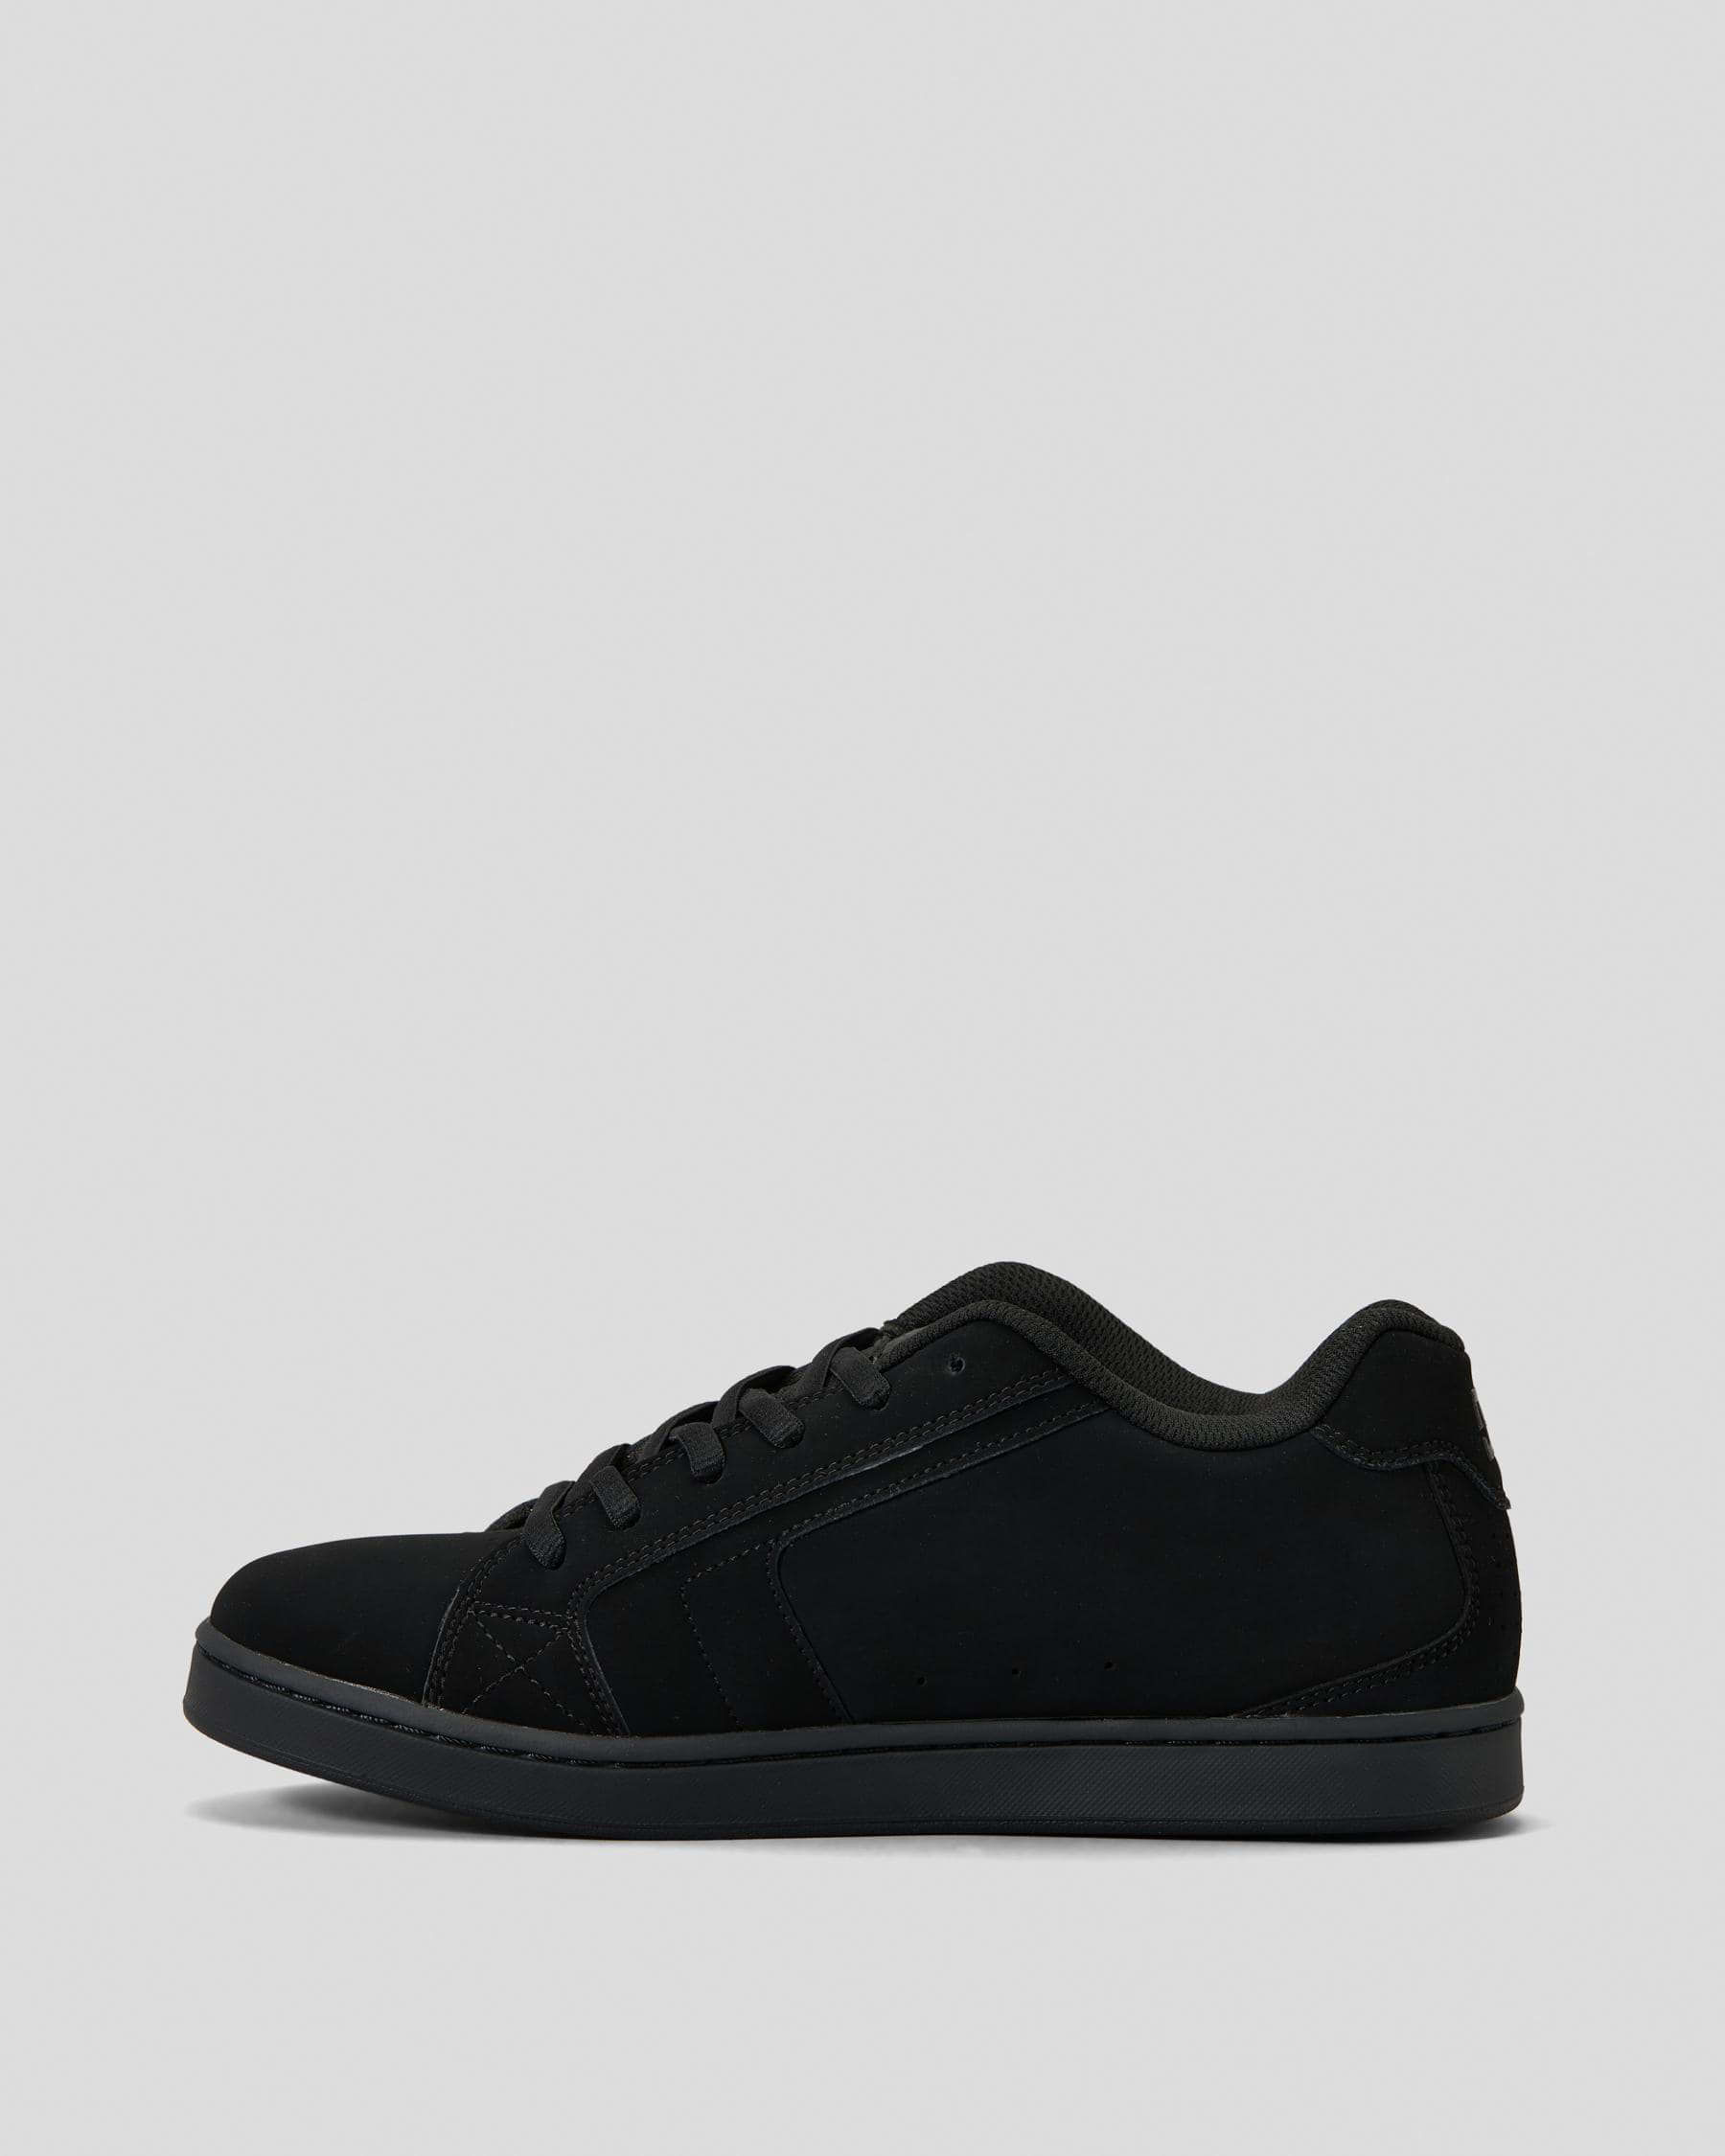 Shop DC Shoes Net Shoes In Black/black/black - Fast Shipping & Easy ...